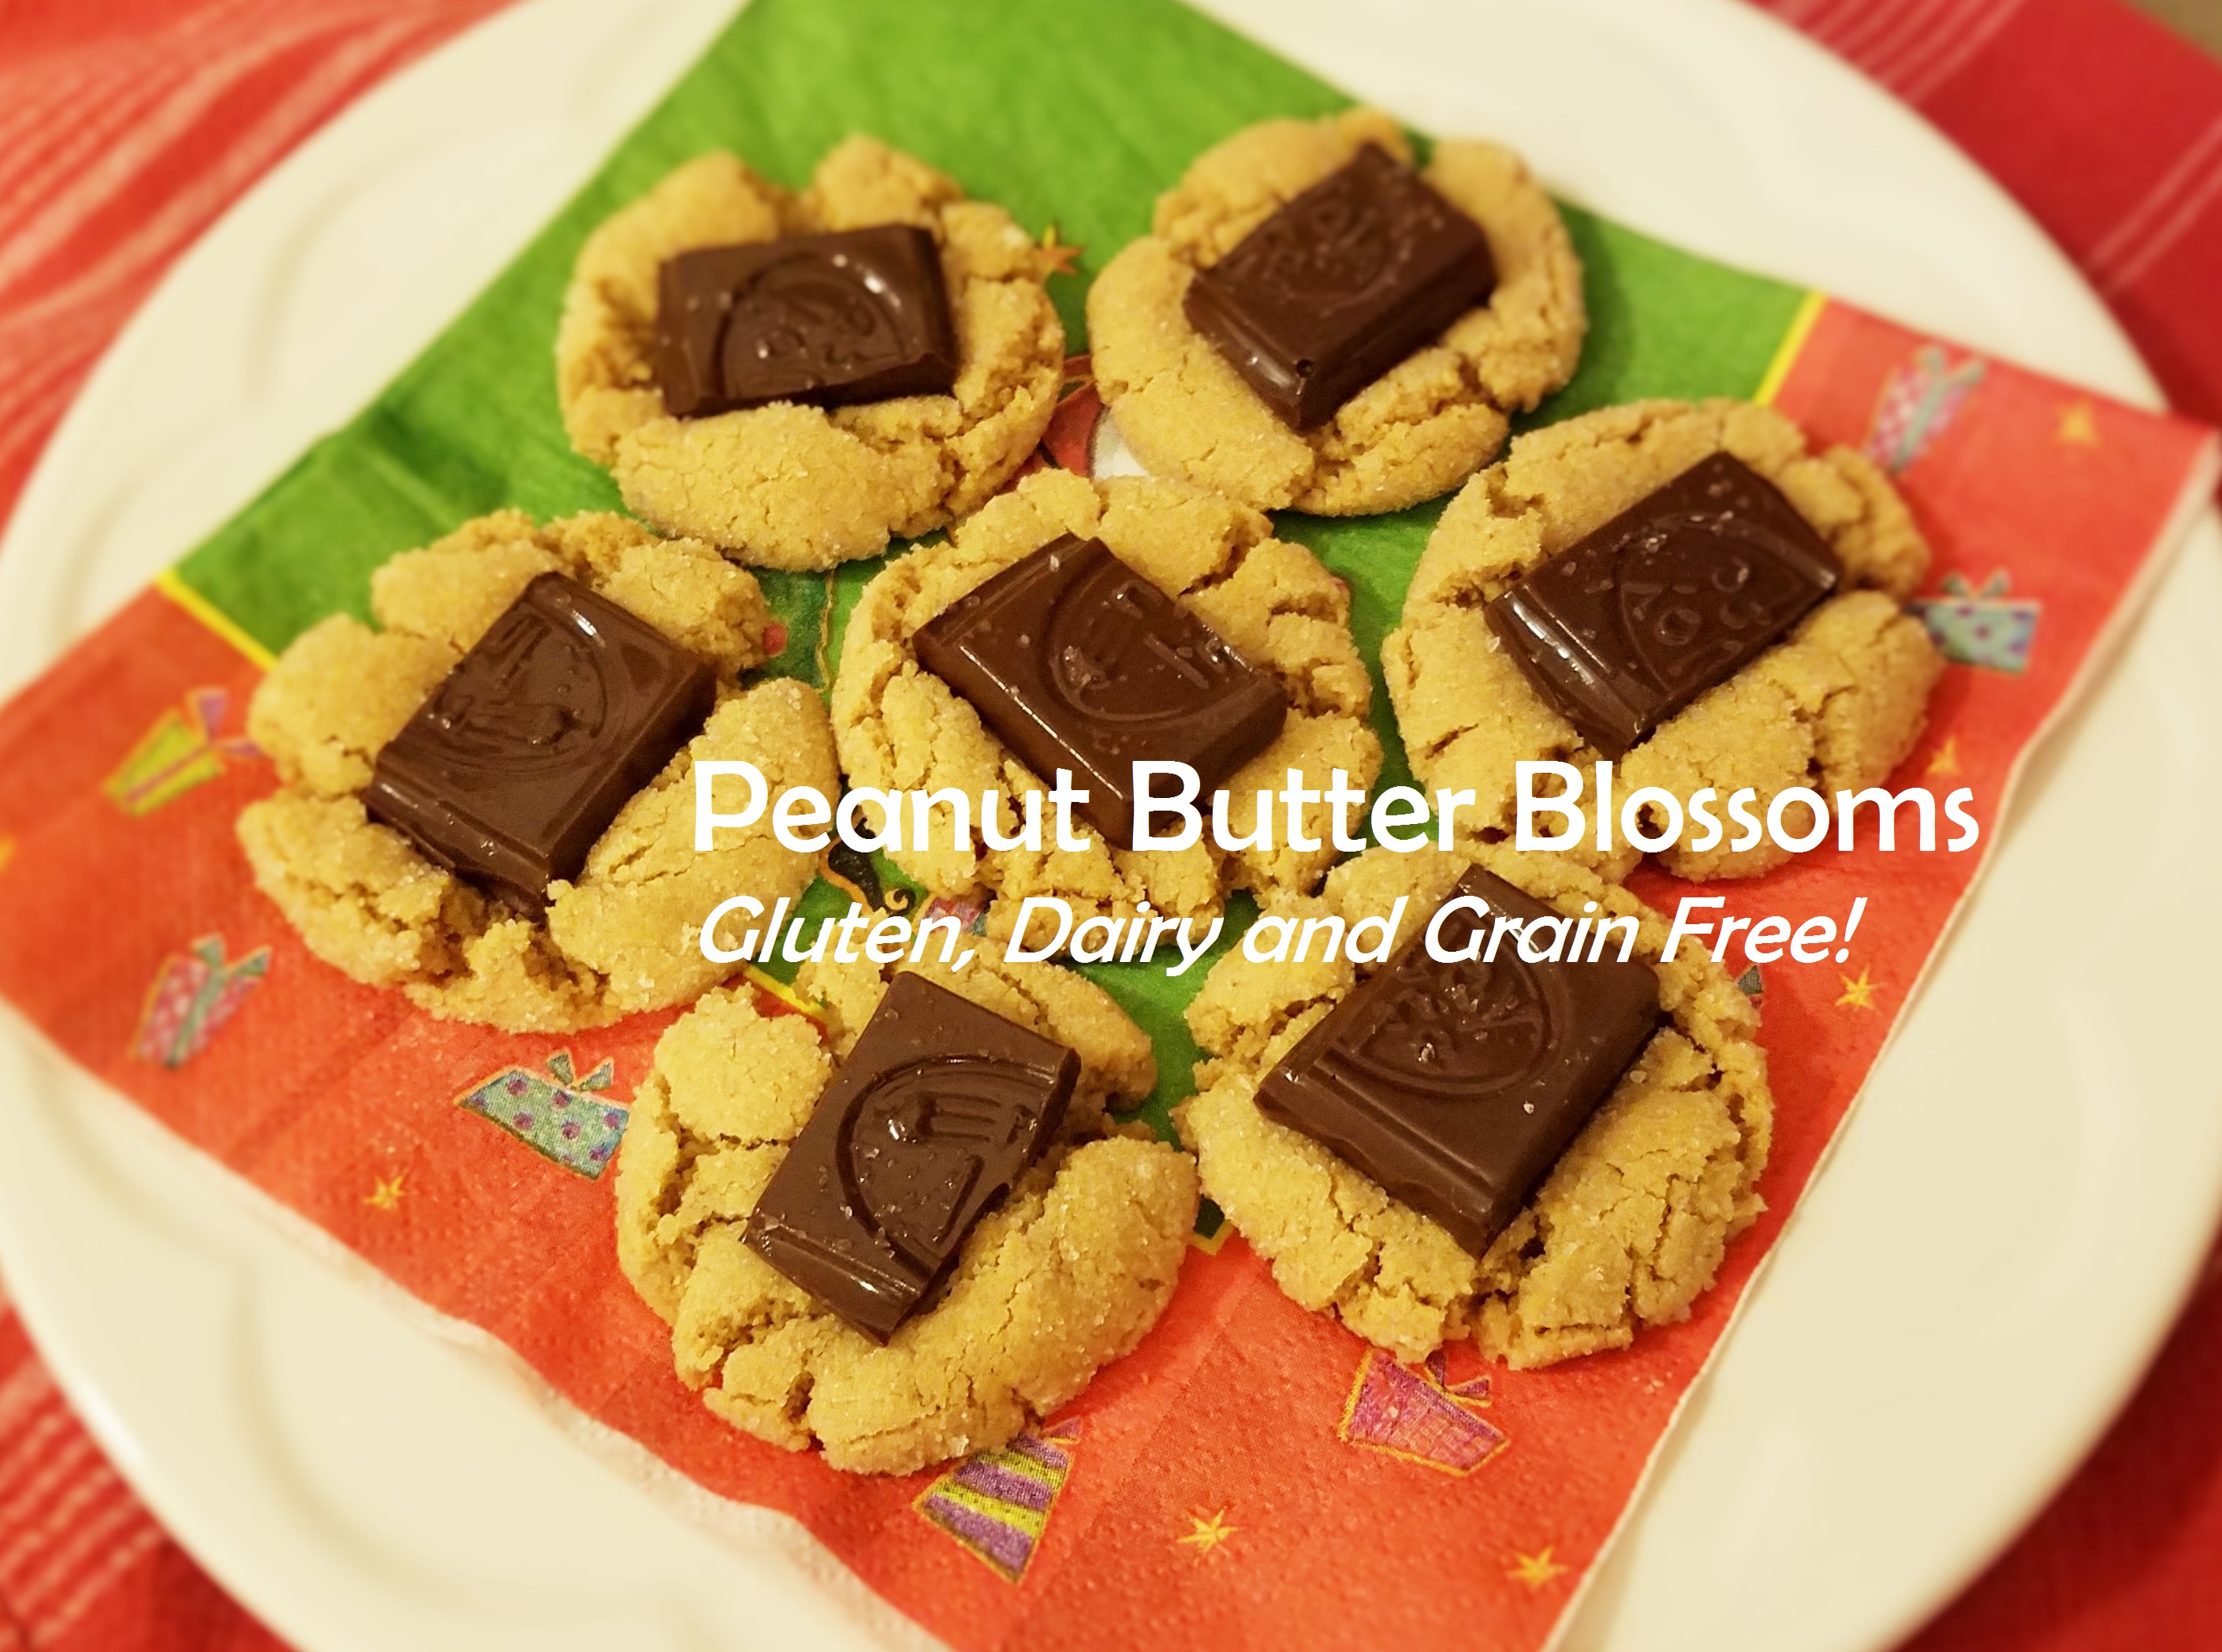 Peanut Butter Blossoms – Gluten, Dairy and Grain Free!